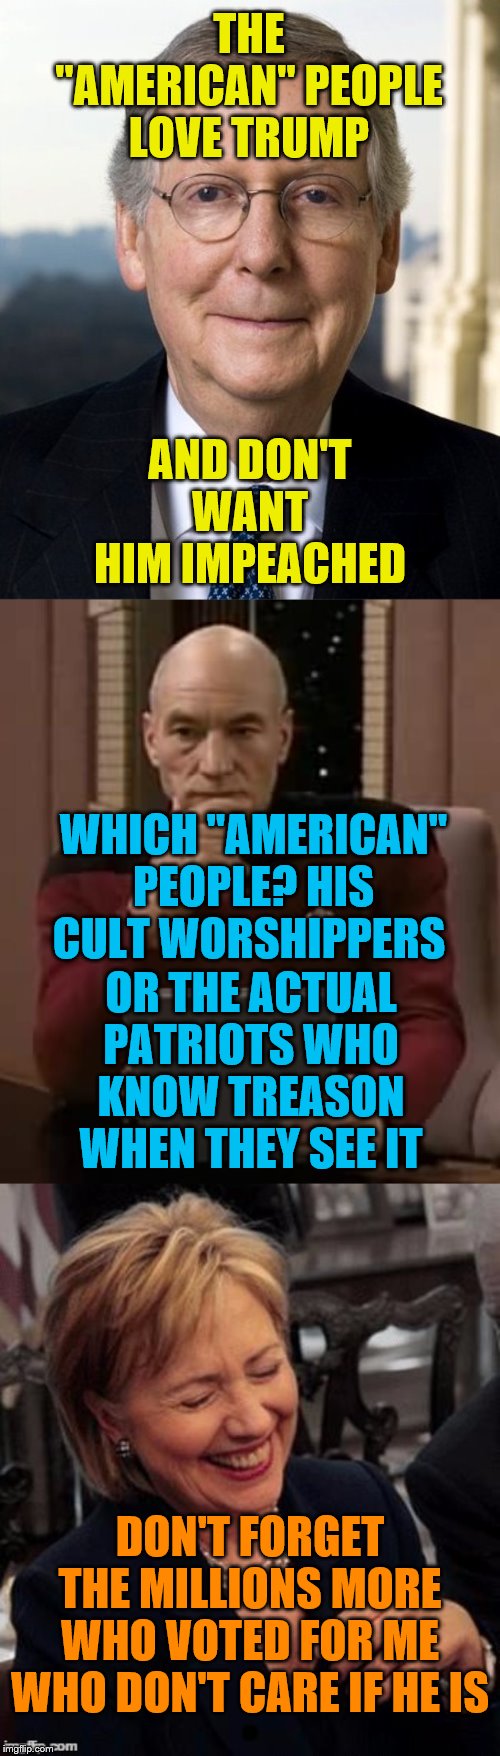 THE "AMERICAN" PEOPLE LOVE TRUMP; AND DON'T WANT HIM IMPEACHED; WHICH "AMERICAN" PEOPLE? HIS CULT WORSHIPPERS; OR THE ACTUAL PATRIOTS WHO KNOW TREASON WHEN THEY SEE IT; DON'T FORGET THE MILLIONS MORE WHO VOTED FOR ME WHO DON'T CARE IF HE IS | image tagged in picard thinking,hillary lol,mitch mcconnel | made w/ Imgflip meme maker